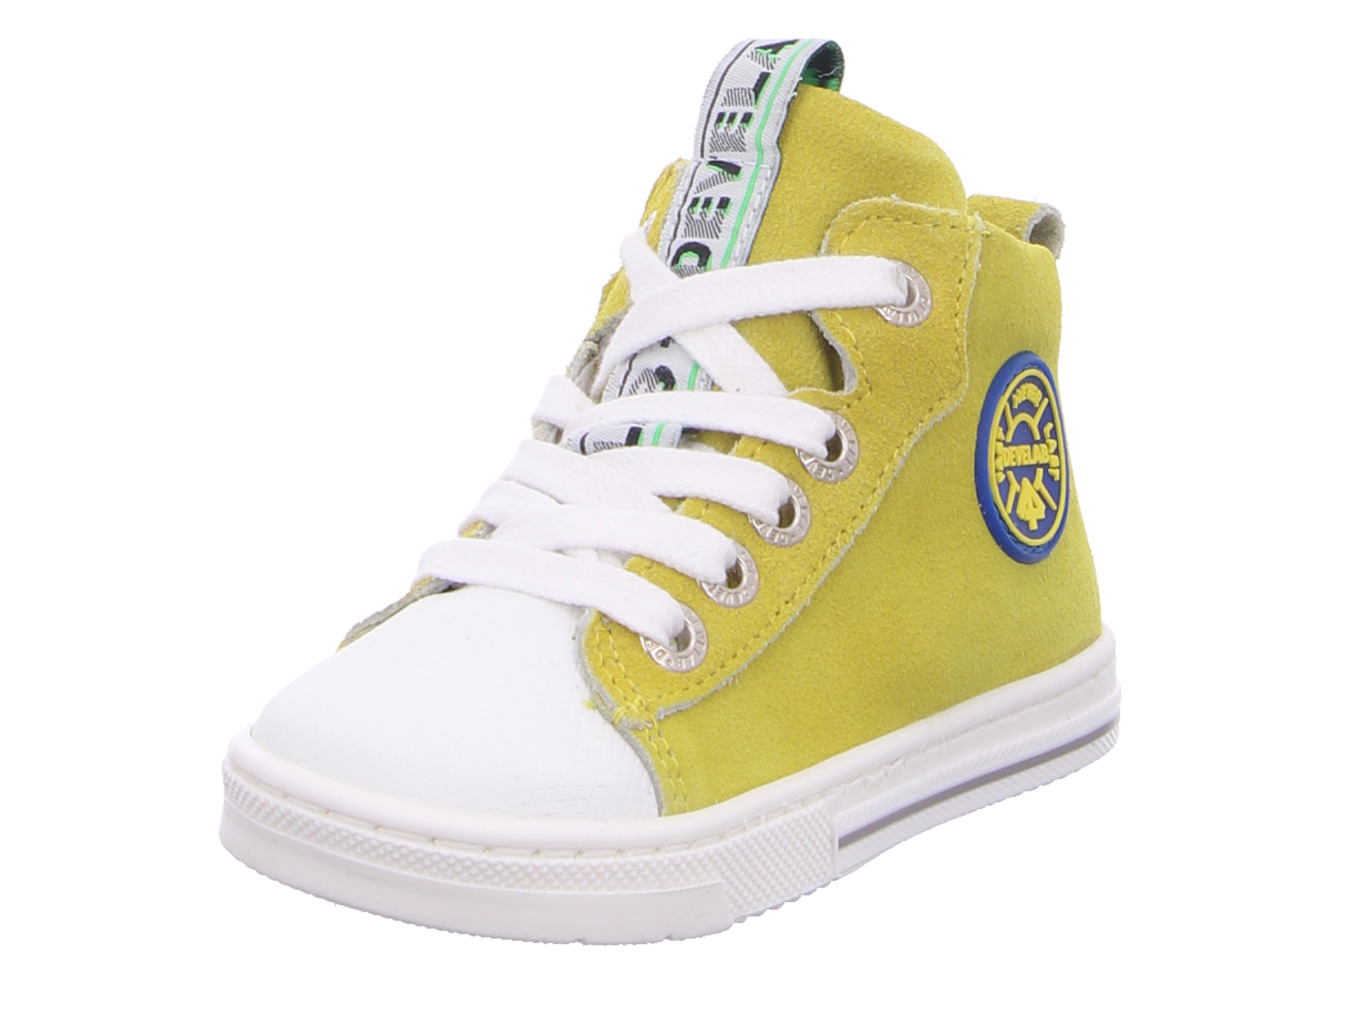 Boys Firststep Mid Cut Laces gelb kombi